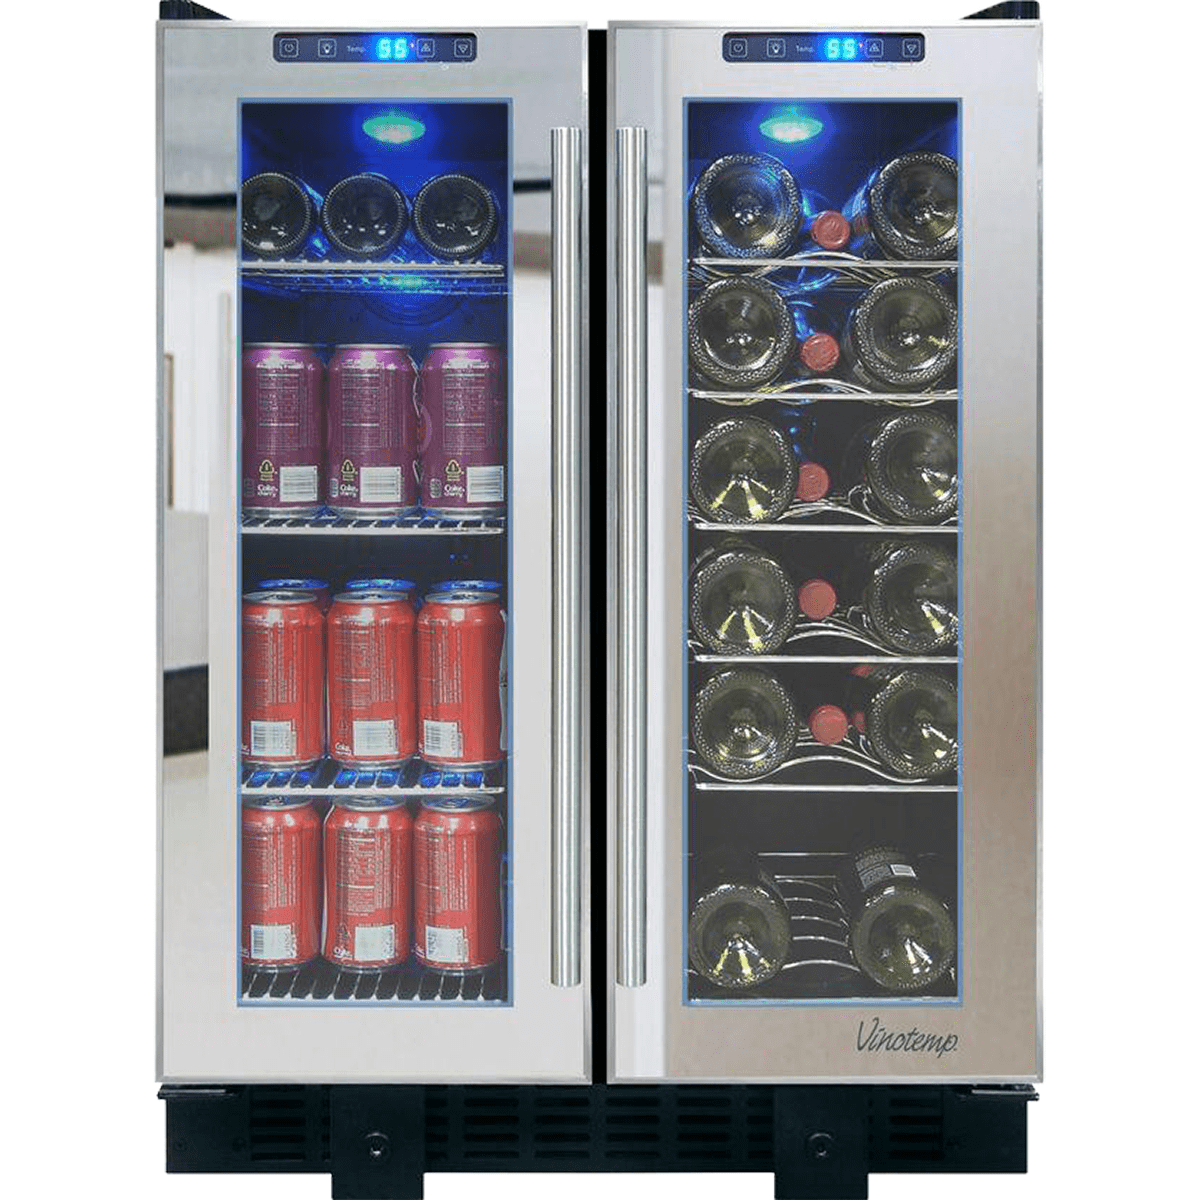 Vinotemp Touch Screen Mirrored Wine and Beverage Cooler (VT-36TS-SM)